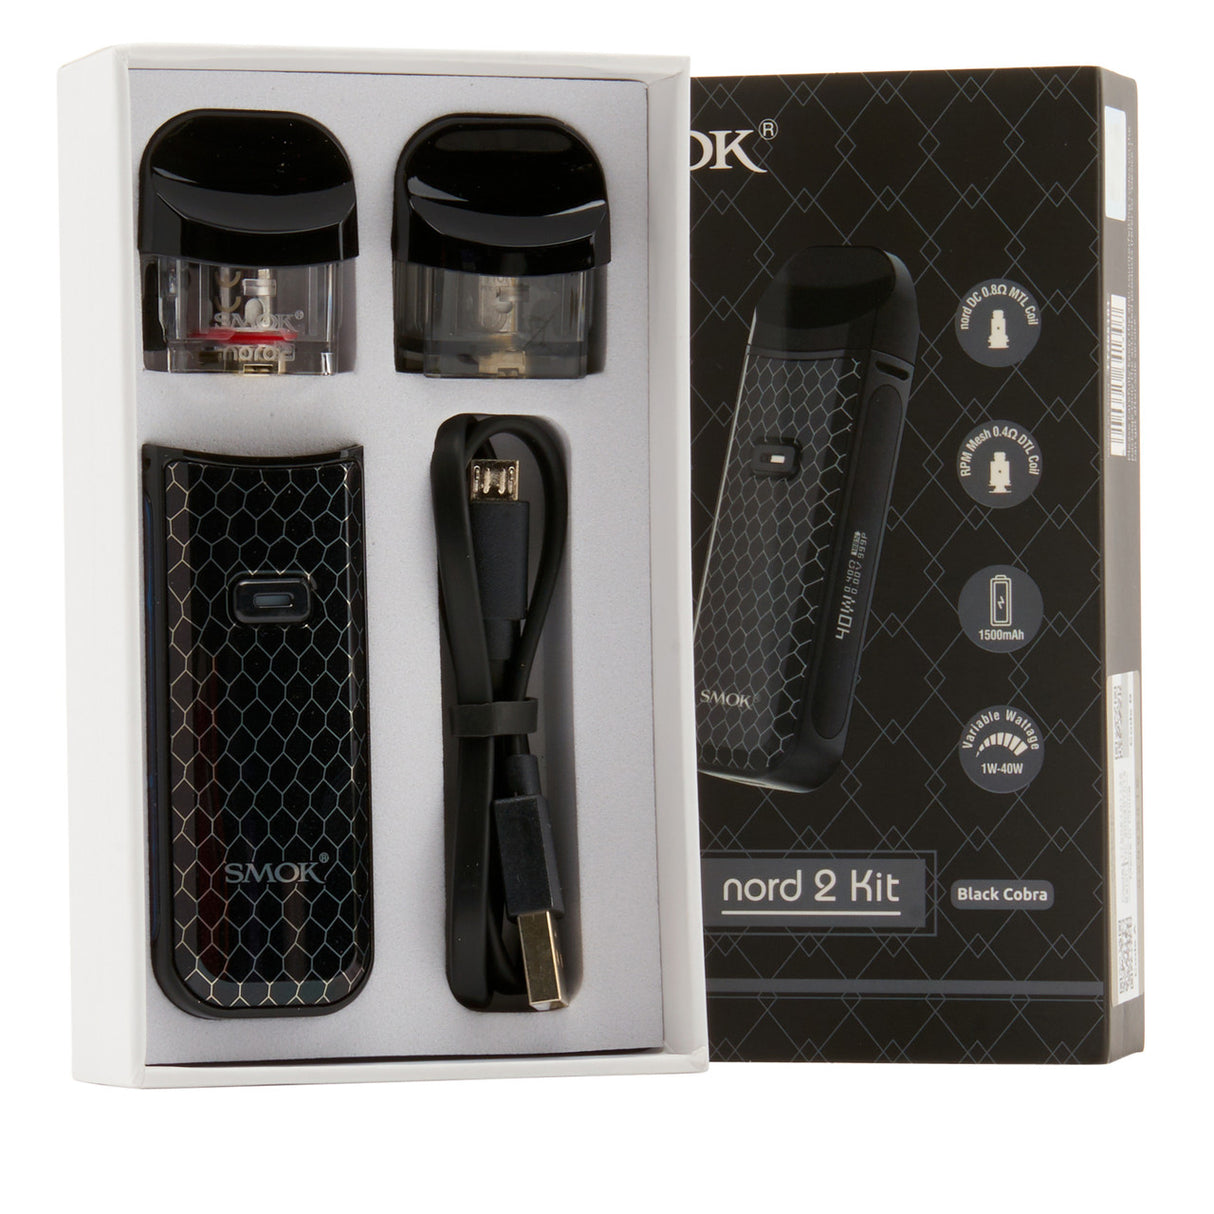 SMOK Nord 2 Vape Kit is perfect for vaping beginners. Get yours today for under $50 3